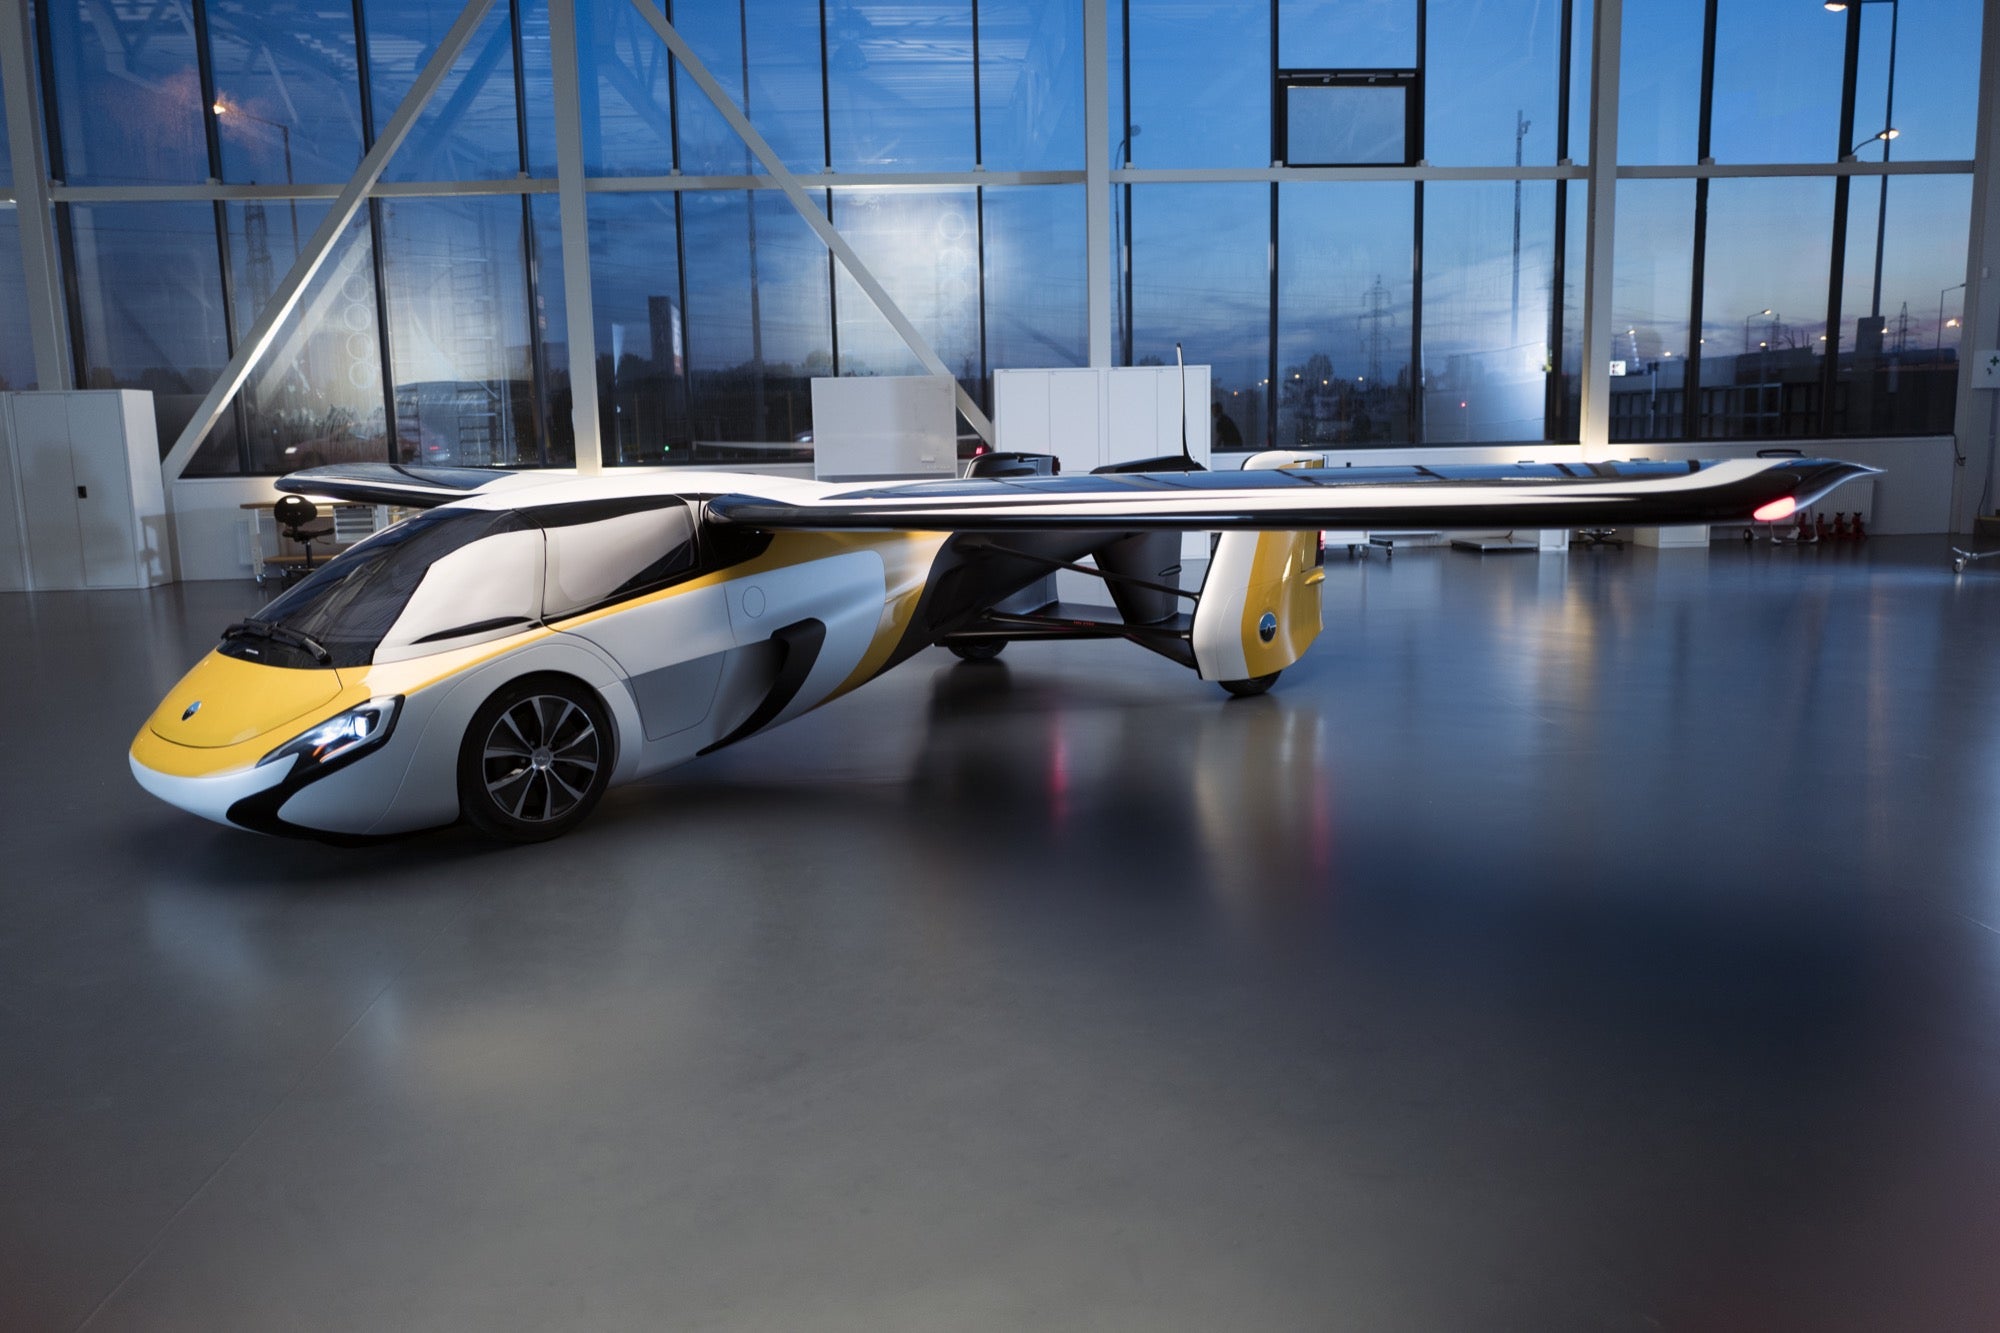 a modern hybrid car airplane model in yellow and white in an indoor hanger